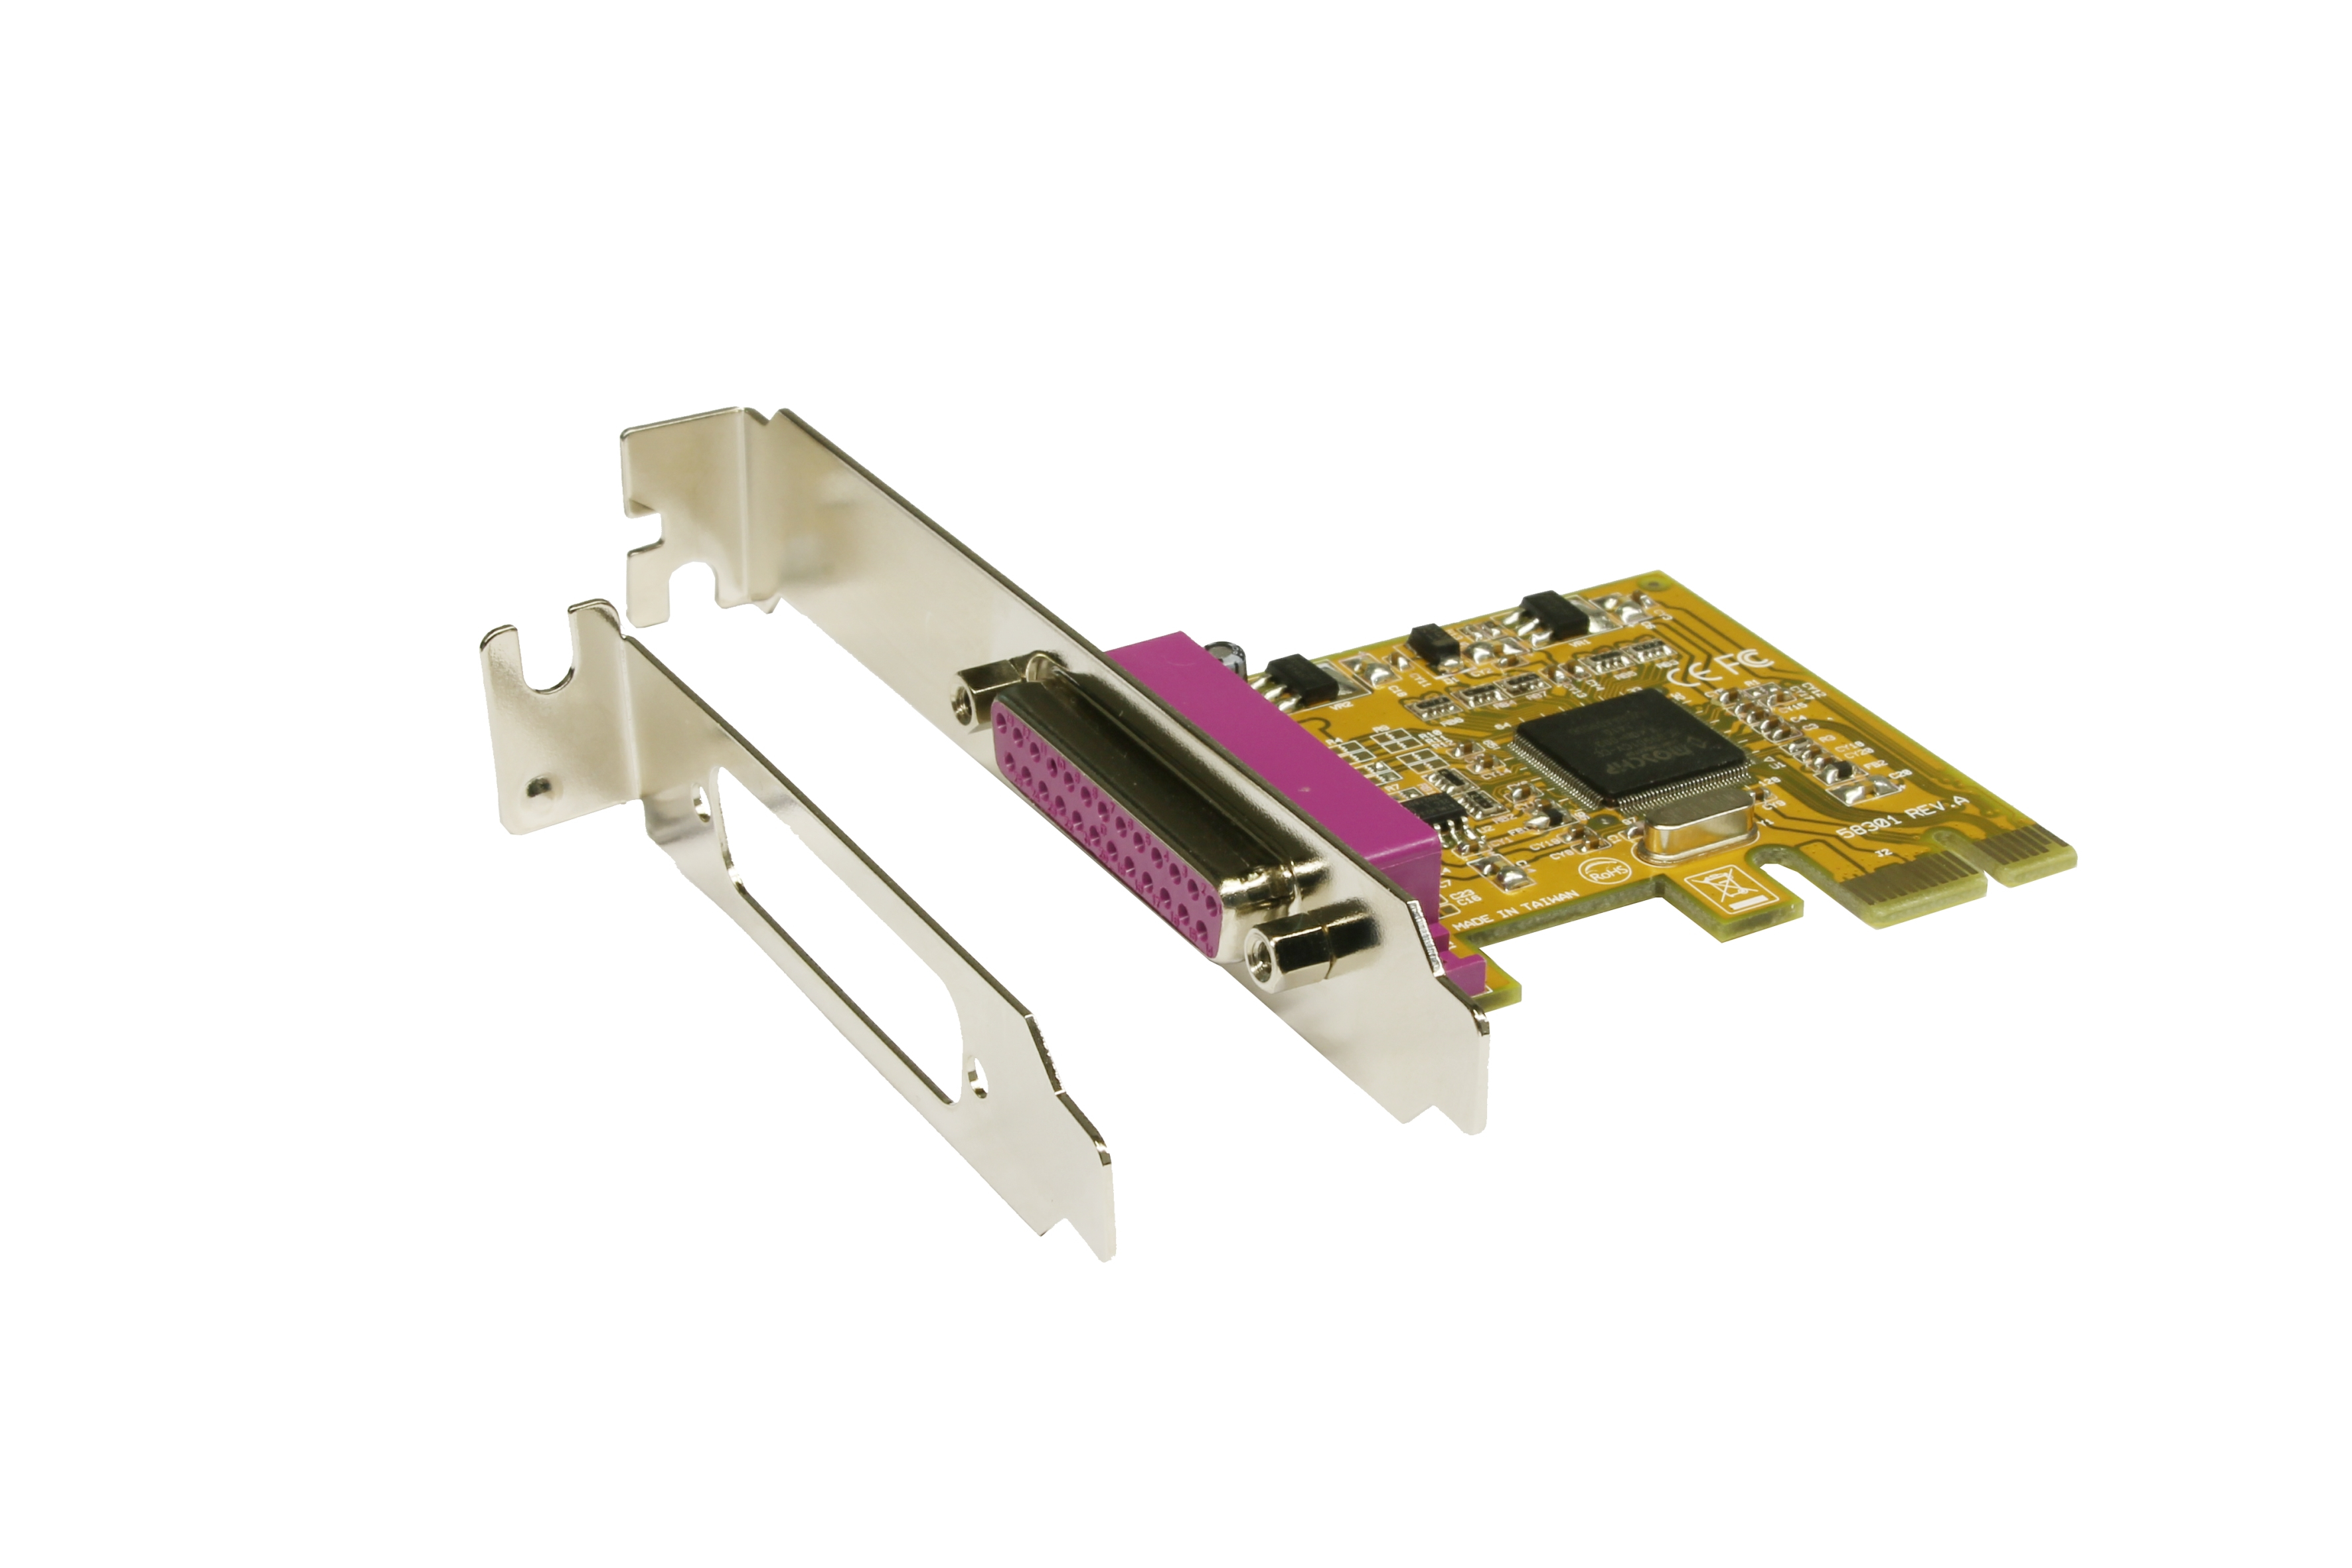 Exsys EX-44001 - Parallel-Adapter - PCIe Low-Profile